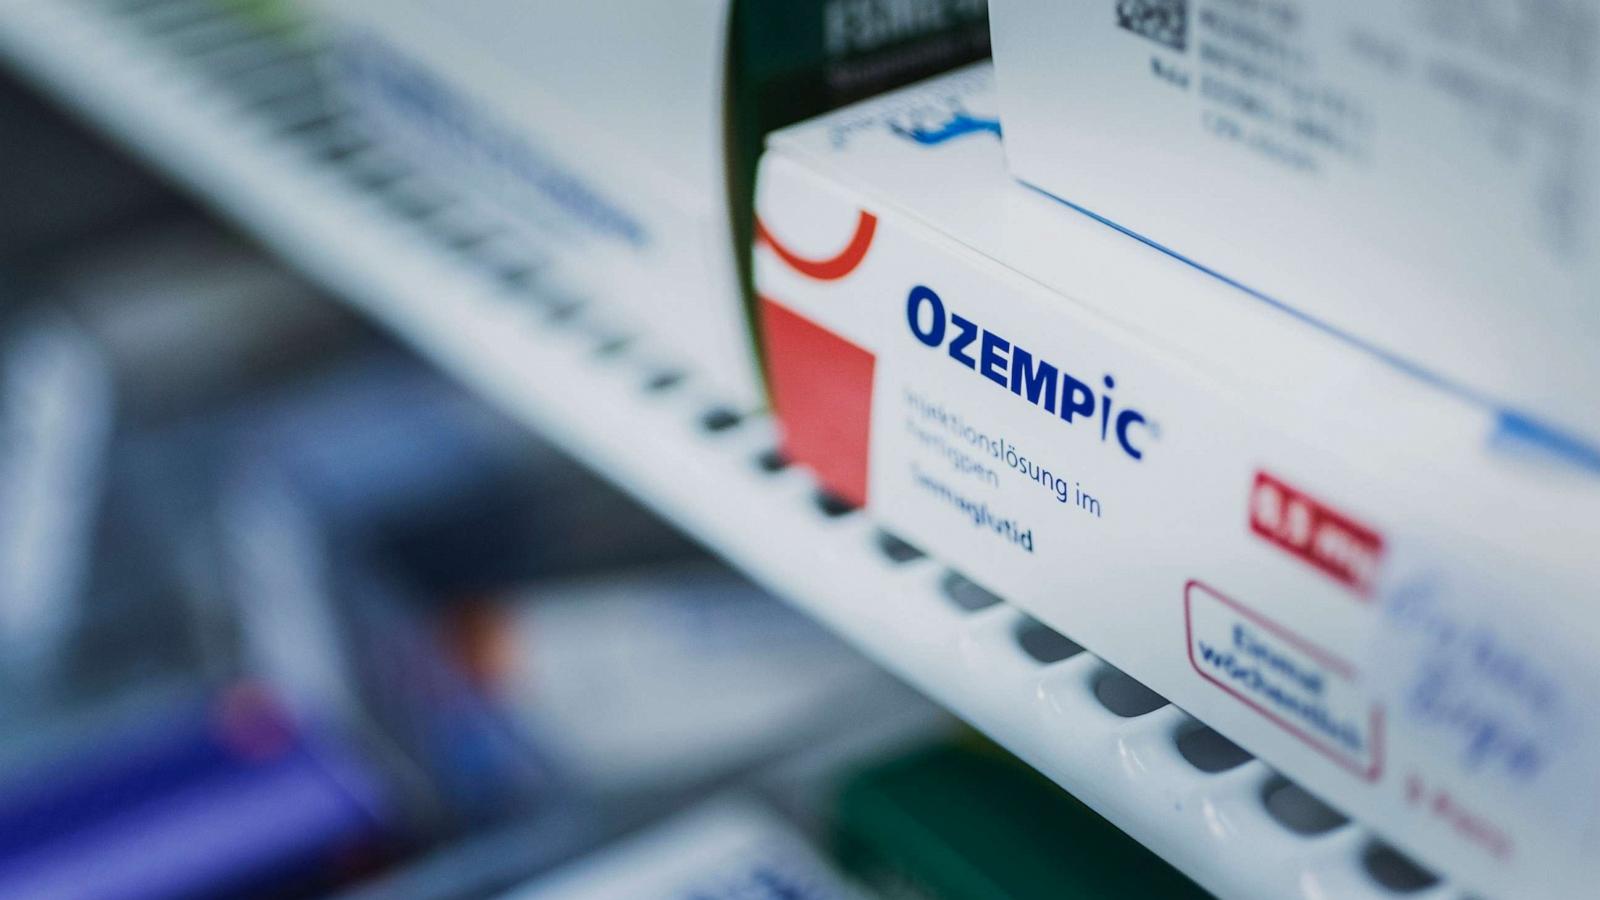 PHOTO: The anti-diabetic medication Ozempic is pictured in a pharmacy on April 13, 2023.